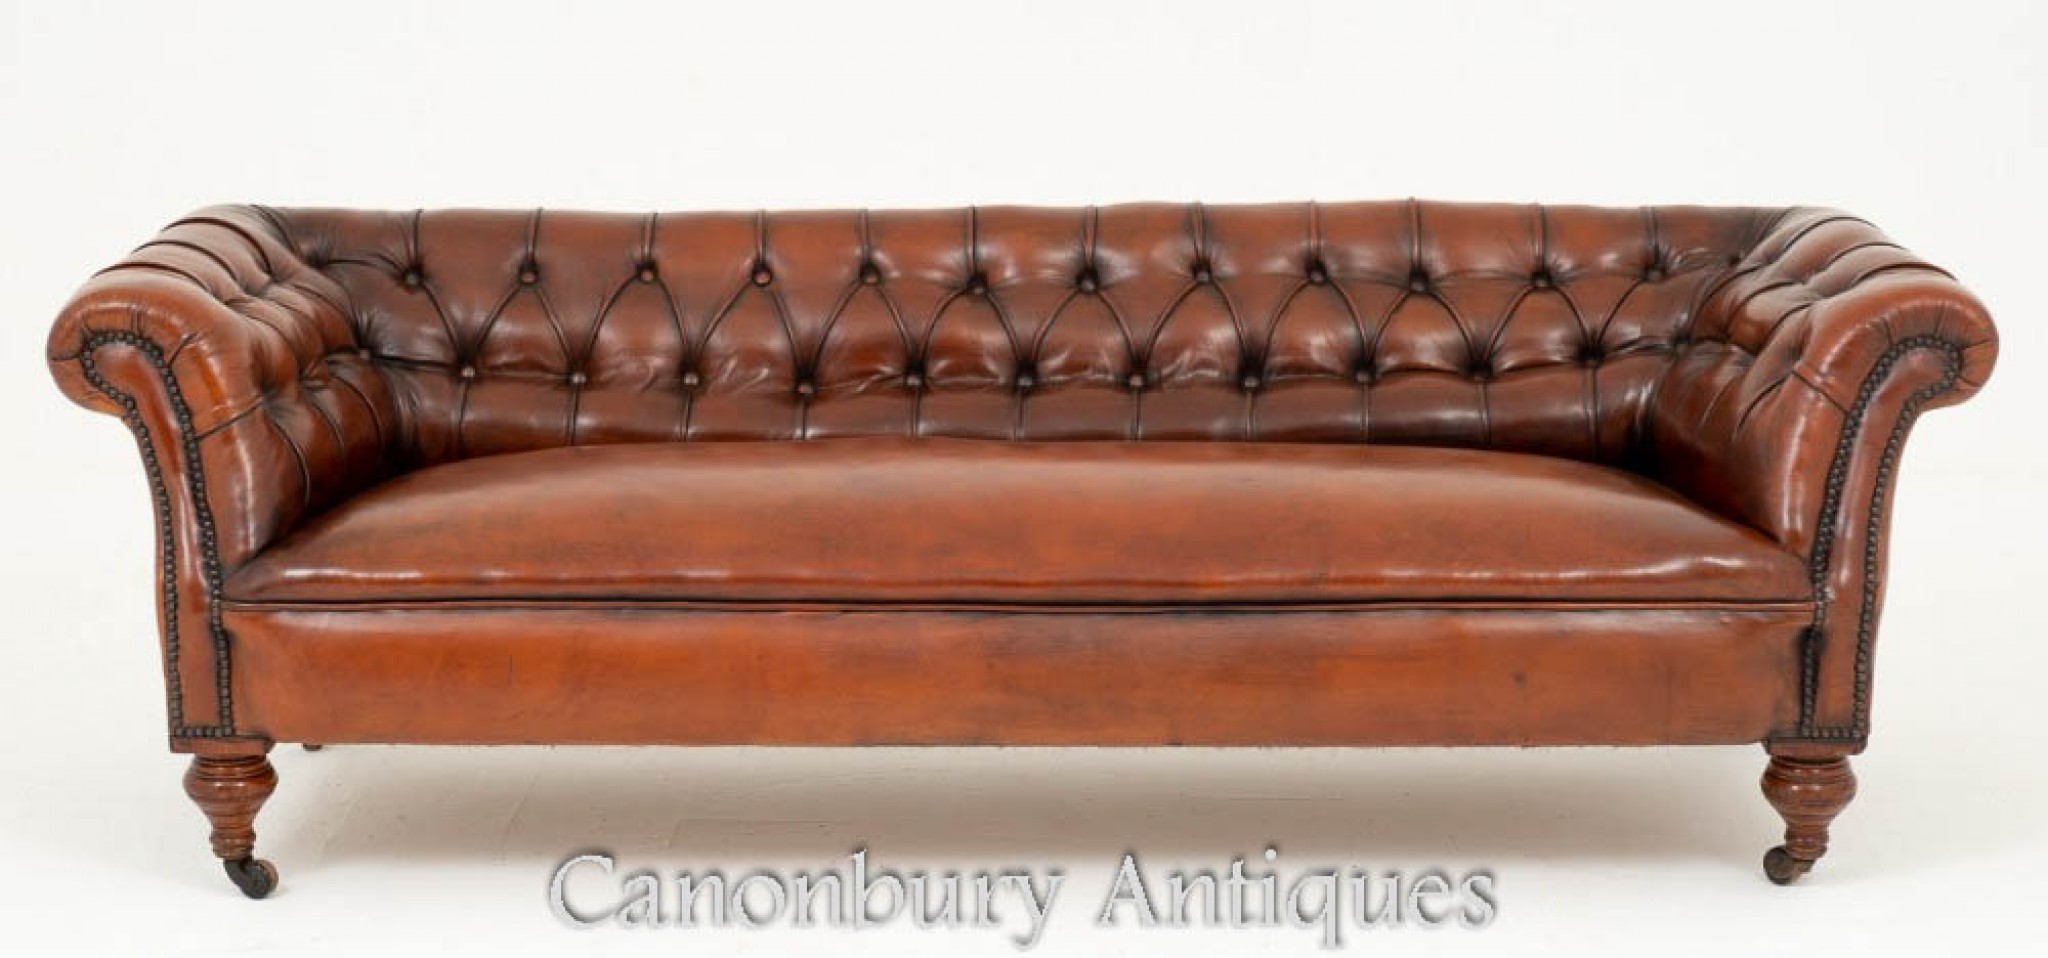 Victorian Chesterfield Sofa Antique Deep Button Leather Couch